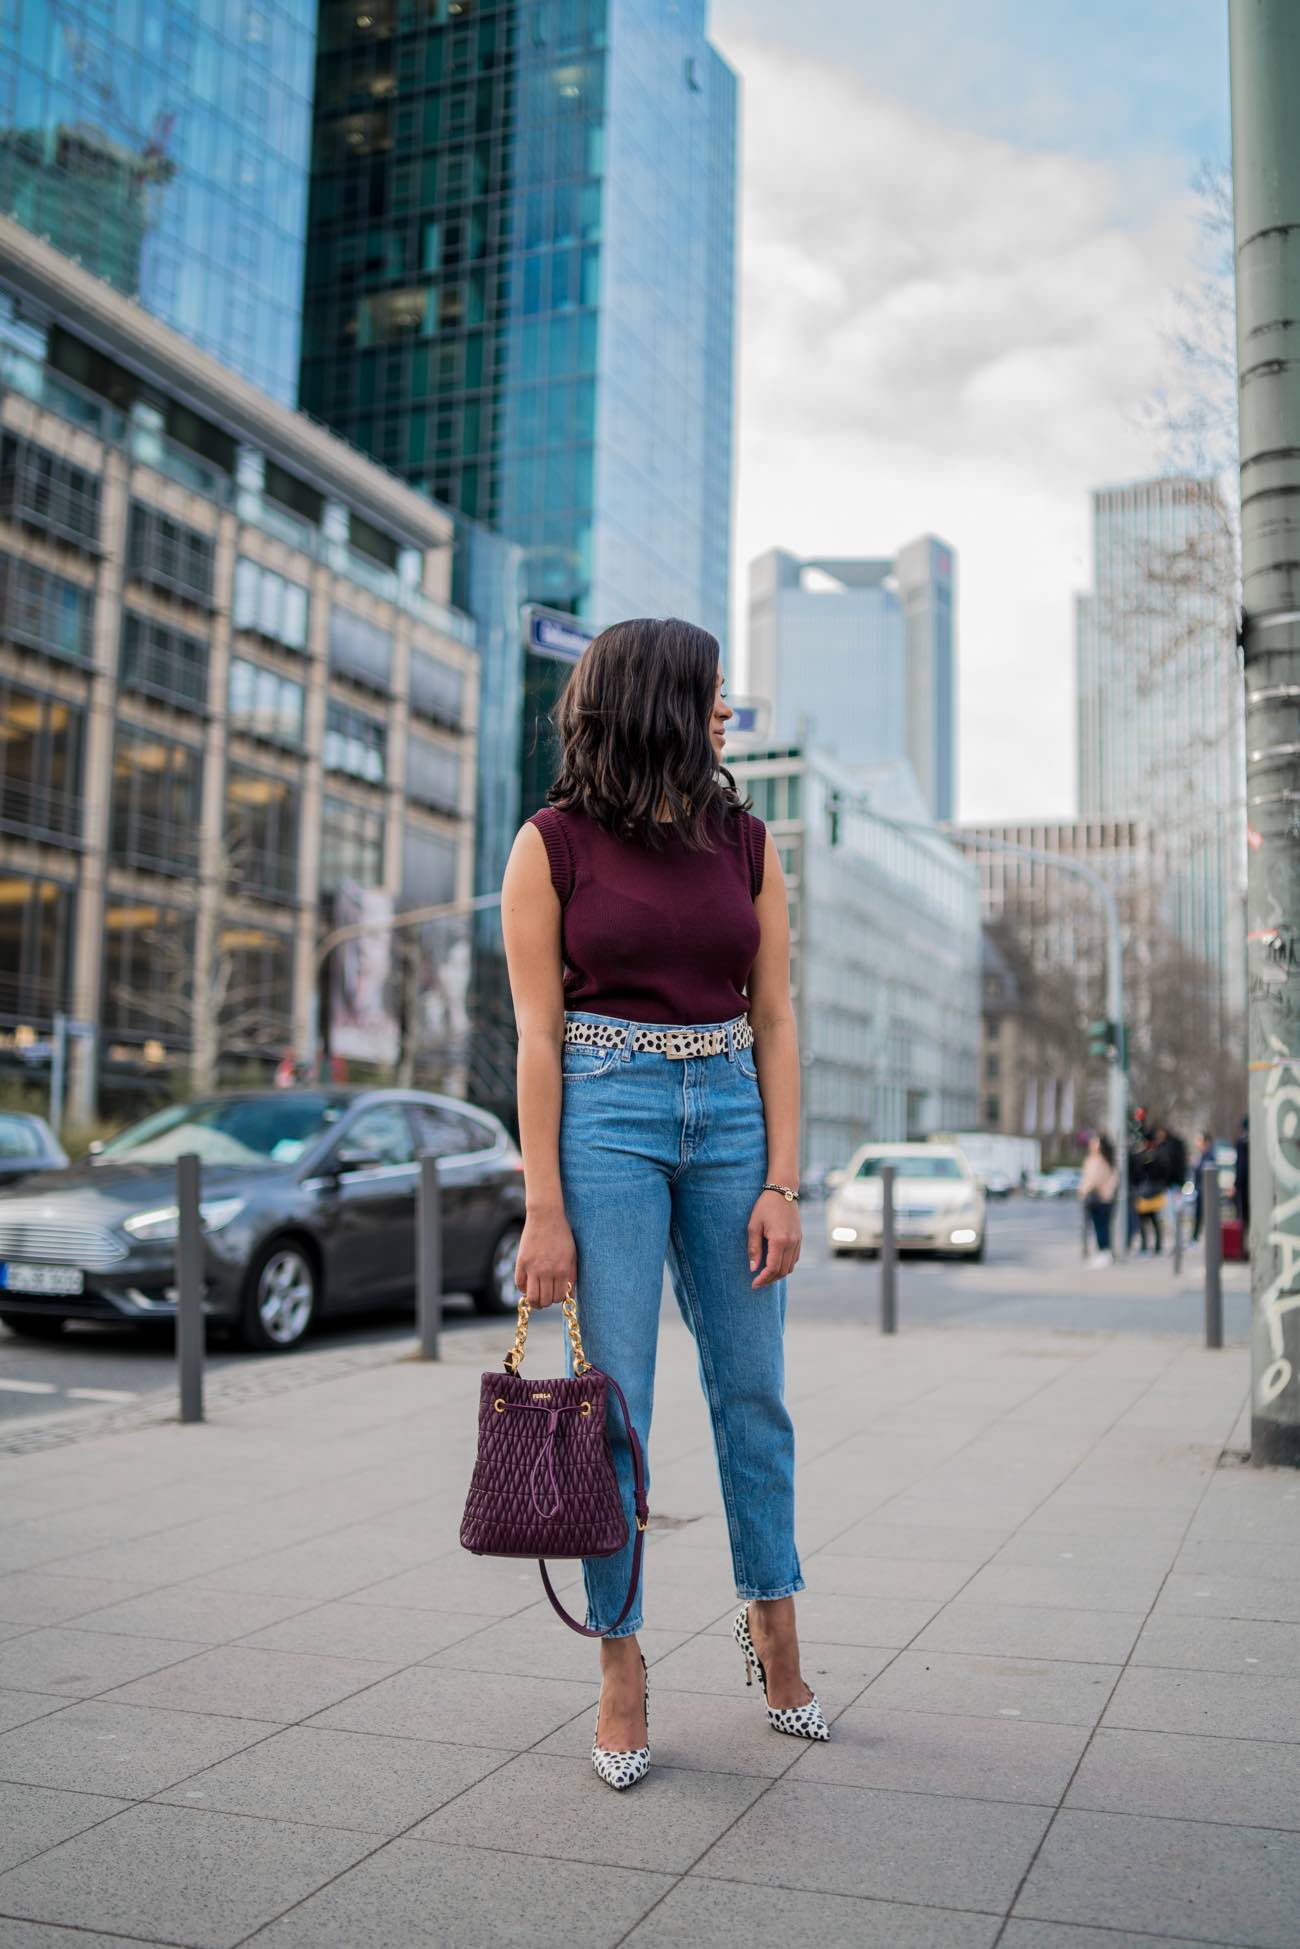 All about the Mom Jeans